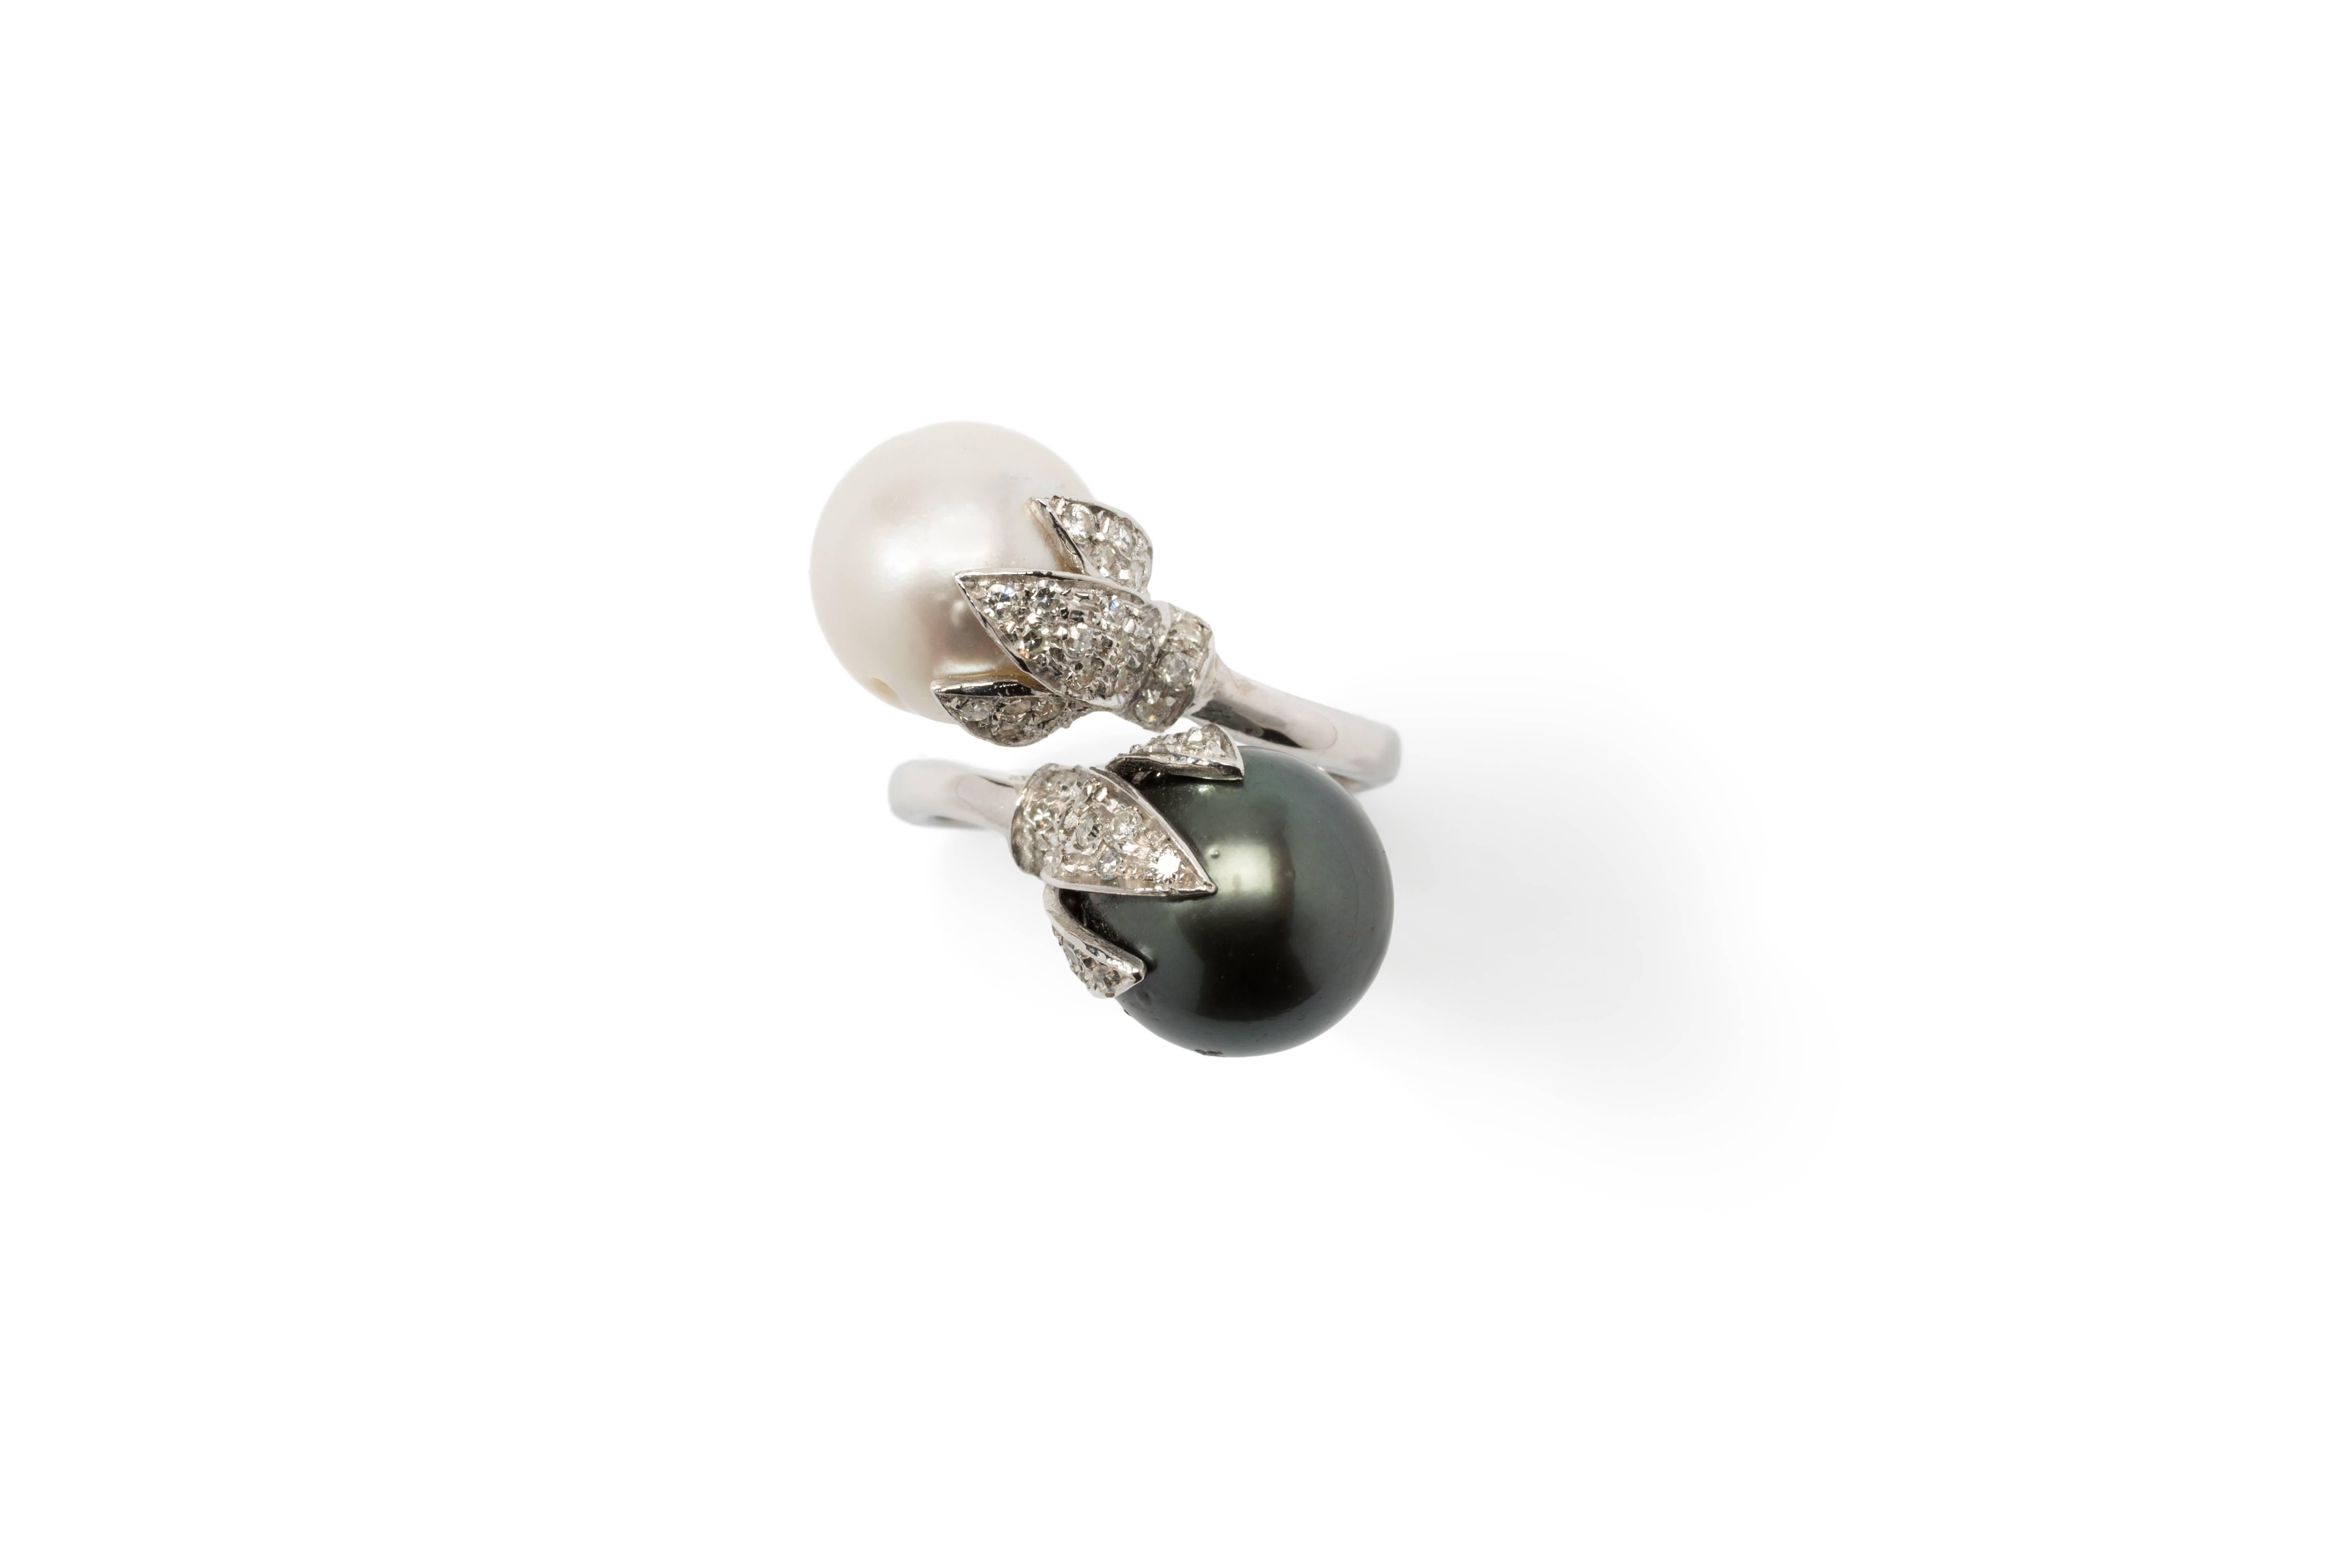 Set with South Sea white pearl and Tahitian black pearl measuring 0.47 in ( 1,2 mm ) in diameter. Decorated by 52 brilliant-cut diamonds. Mounted in 14 K white gold. Hallmarked inside with the purity 585. Total weight: 11,33 g. Ring size: 54 ( US